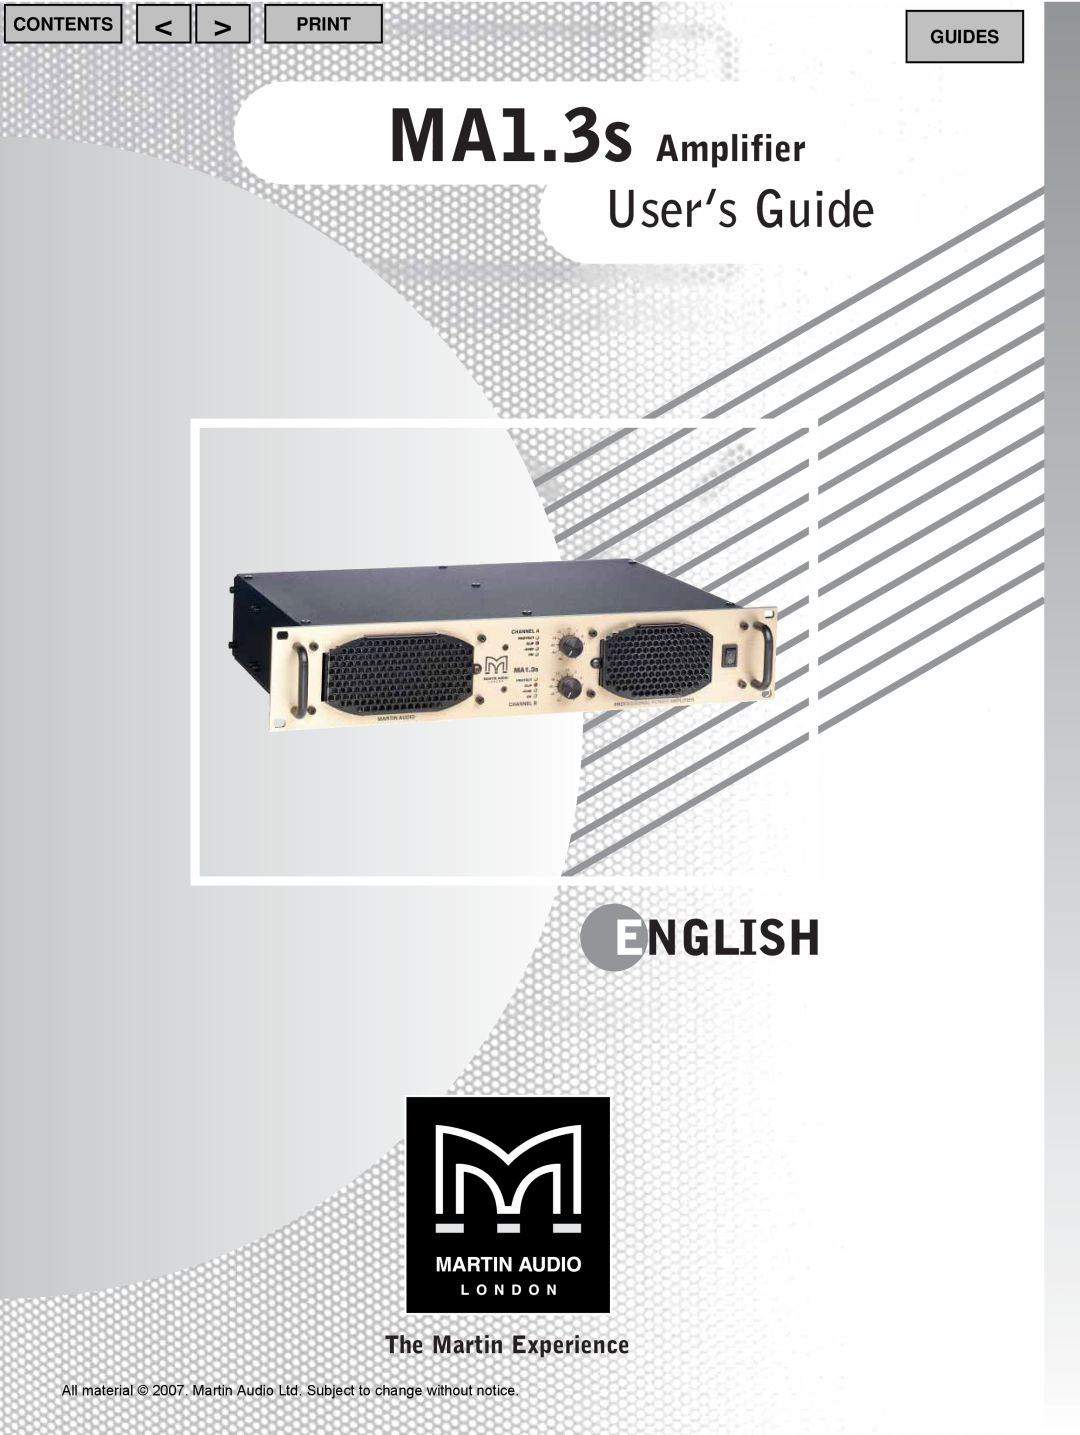 Martin Audio User’s Guide, English, MA1.3s Amplifier, The Martin Experience, Contents, Print, Guides 